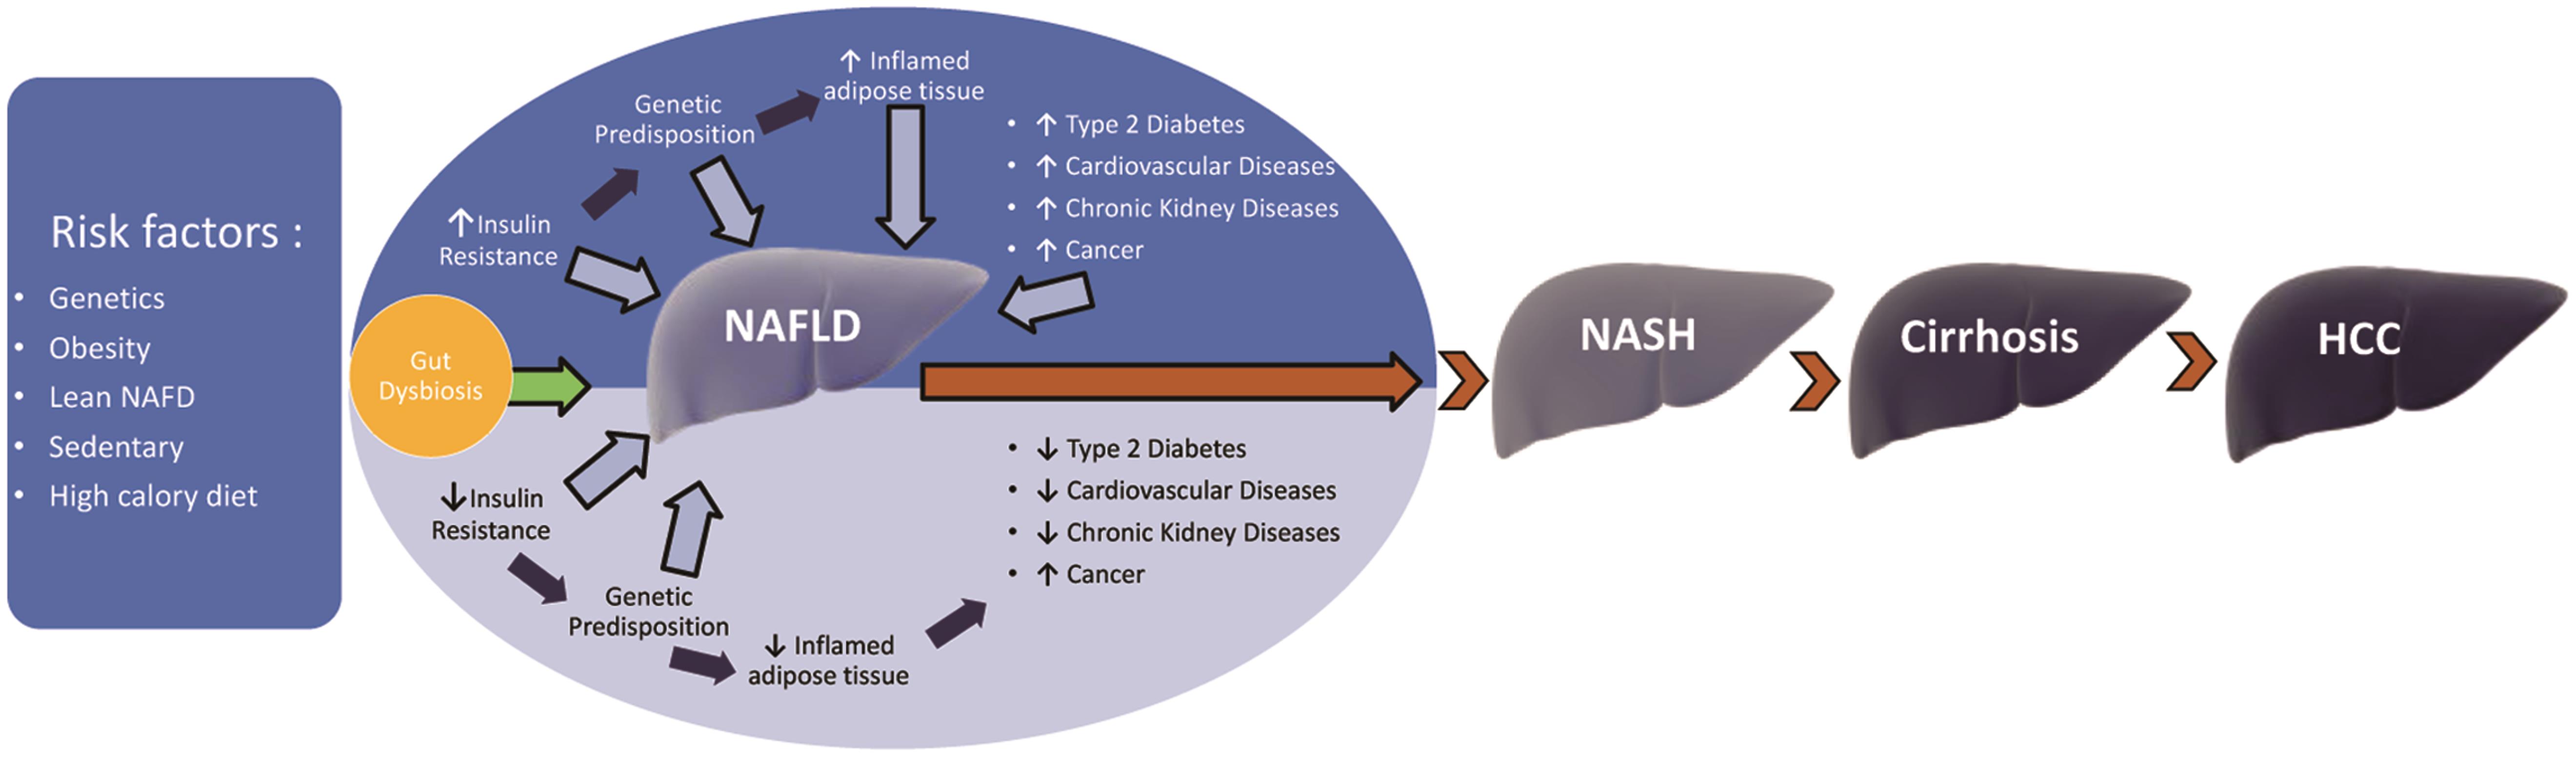 Schematic representation of the pathogenesis of NAFLD and progression from NAFLD to NASH, cirrhosis, and HCC.